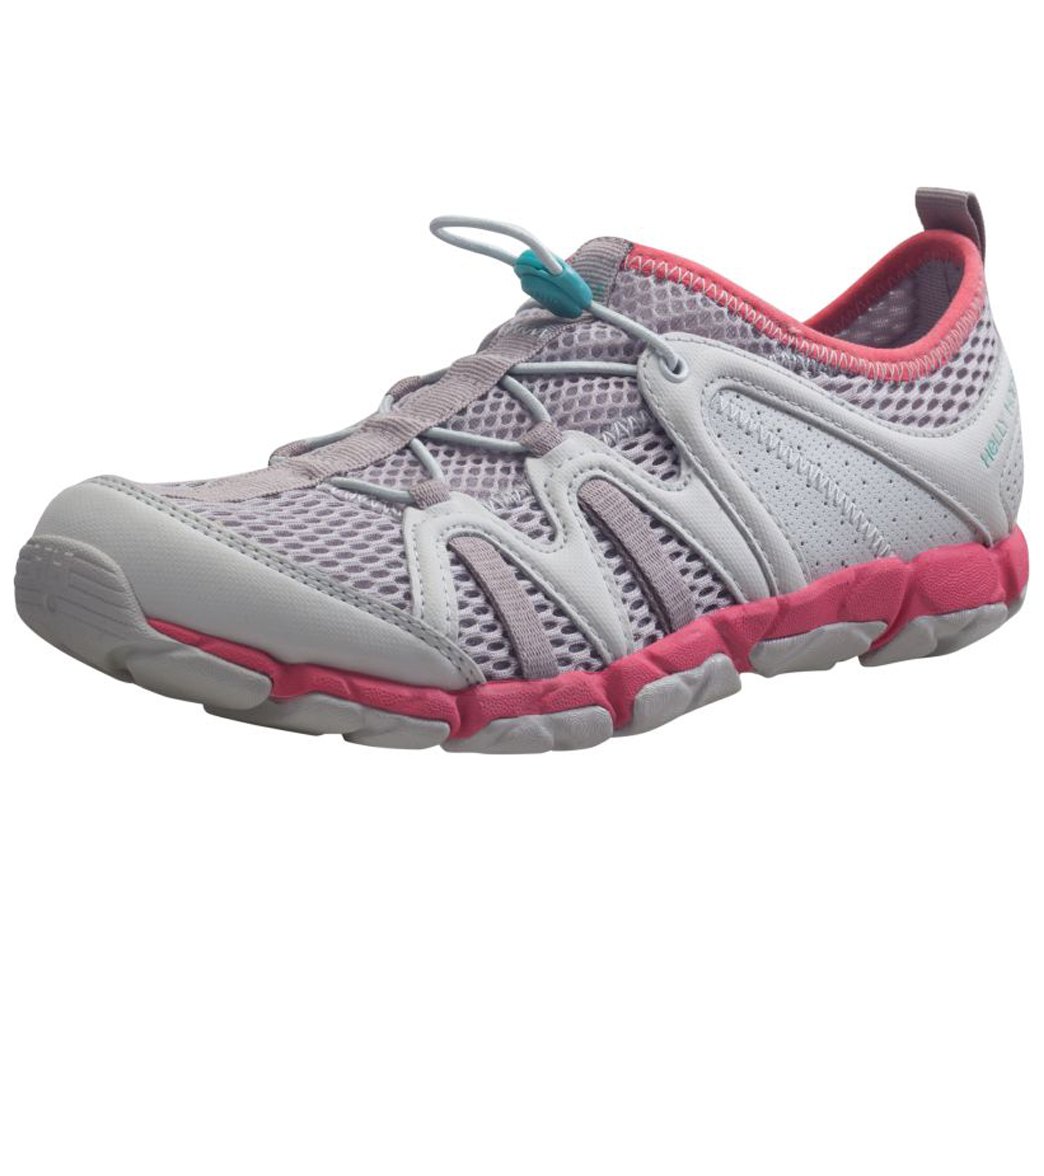 Helly Hansen Women's Aquapace Water Shoes at SwimOutlet.com - Free Shipping